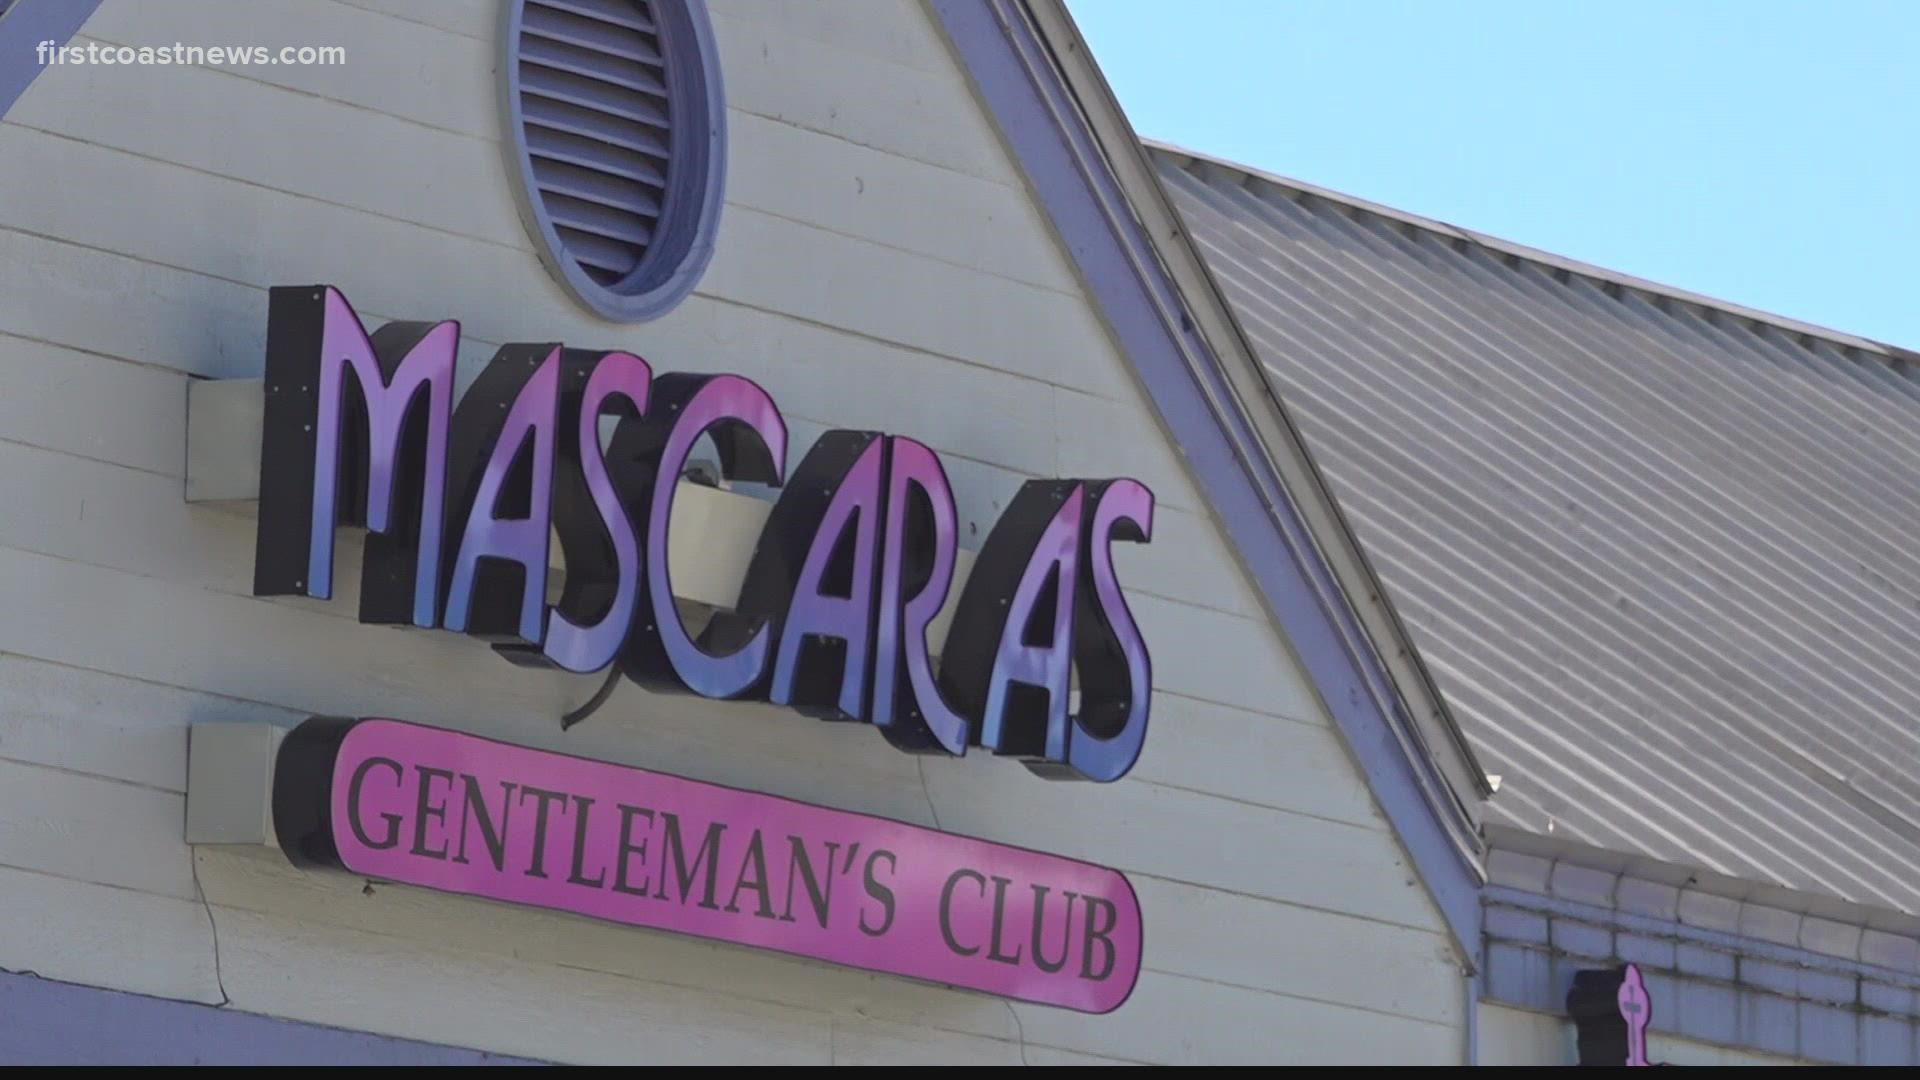 Matt Carlucci says he gets texts every day calling for the club to close. "This place breeds problems," he said.